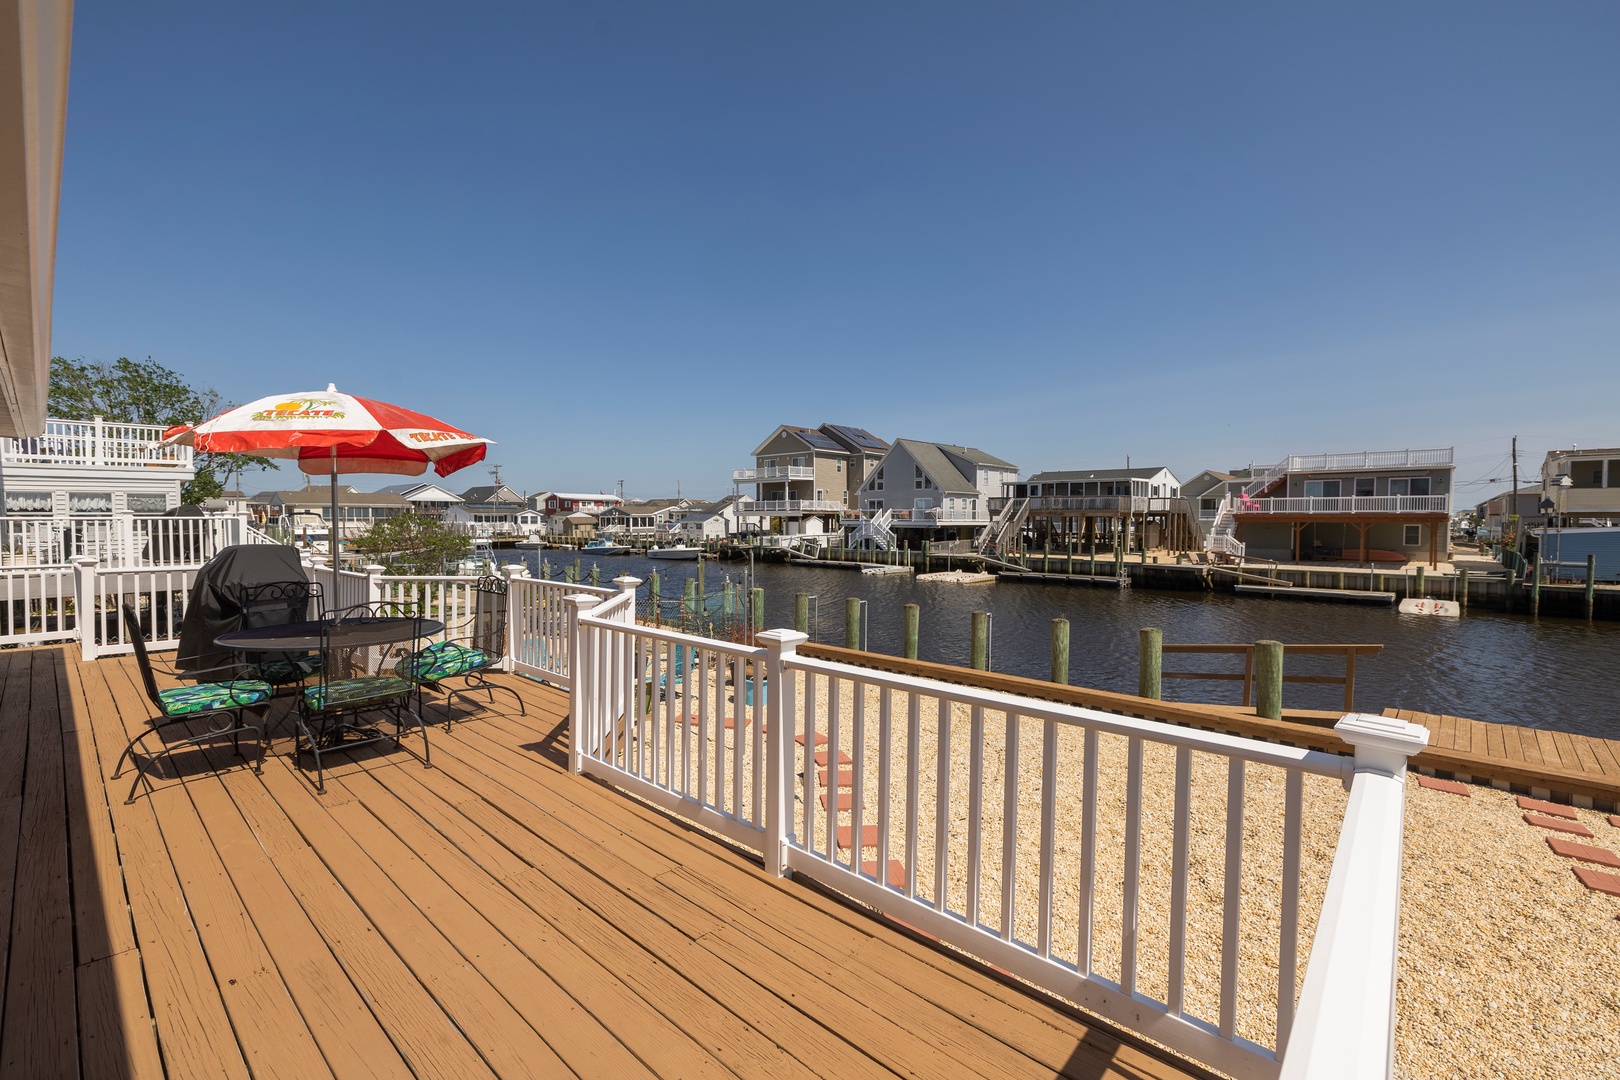 Indulge in the expansive deck overlooking the lagoon